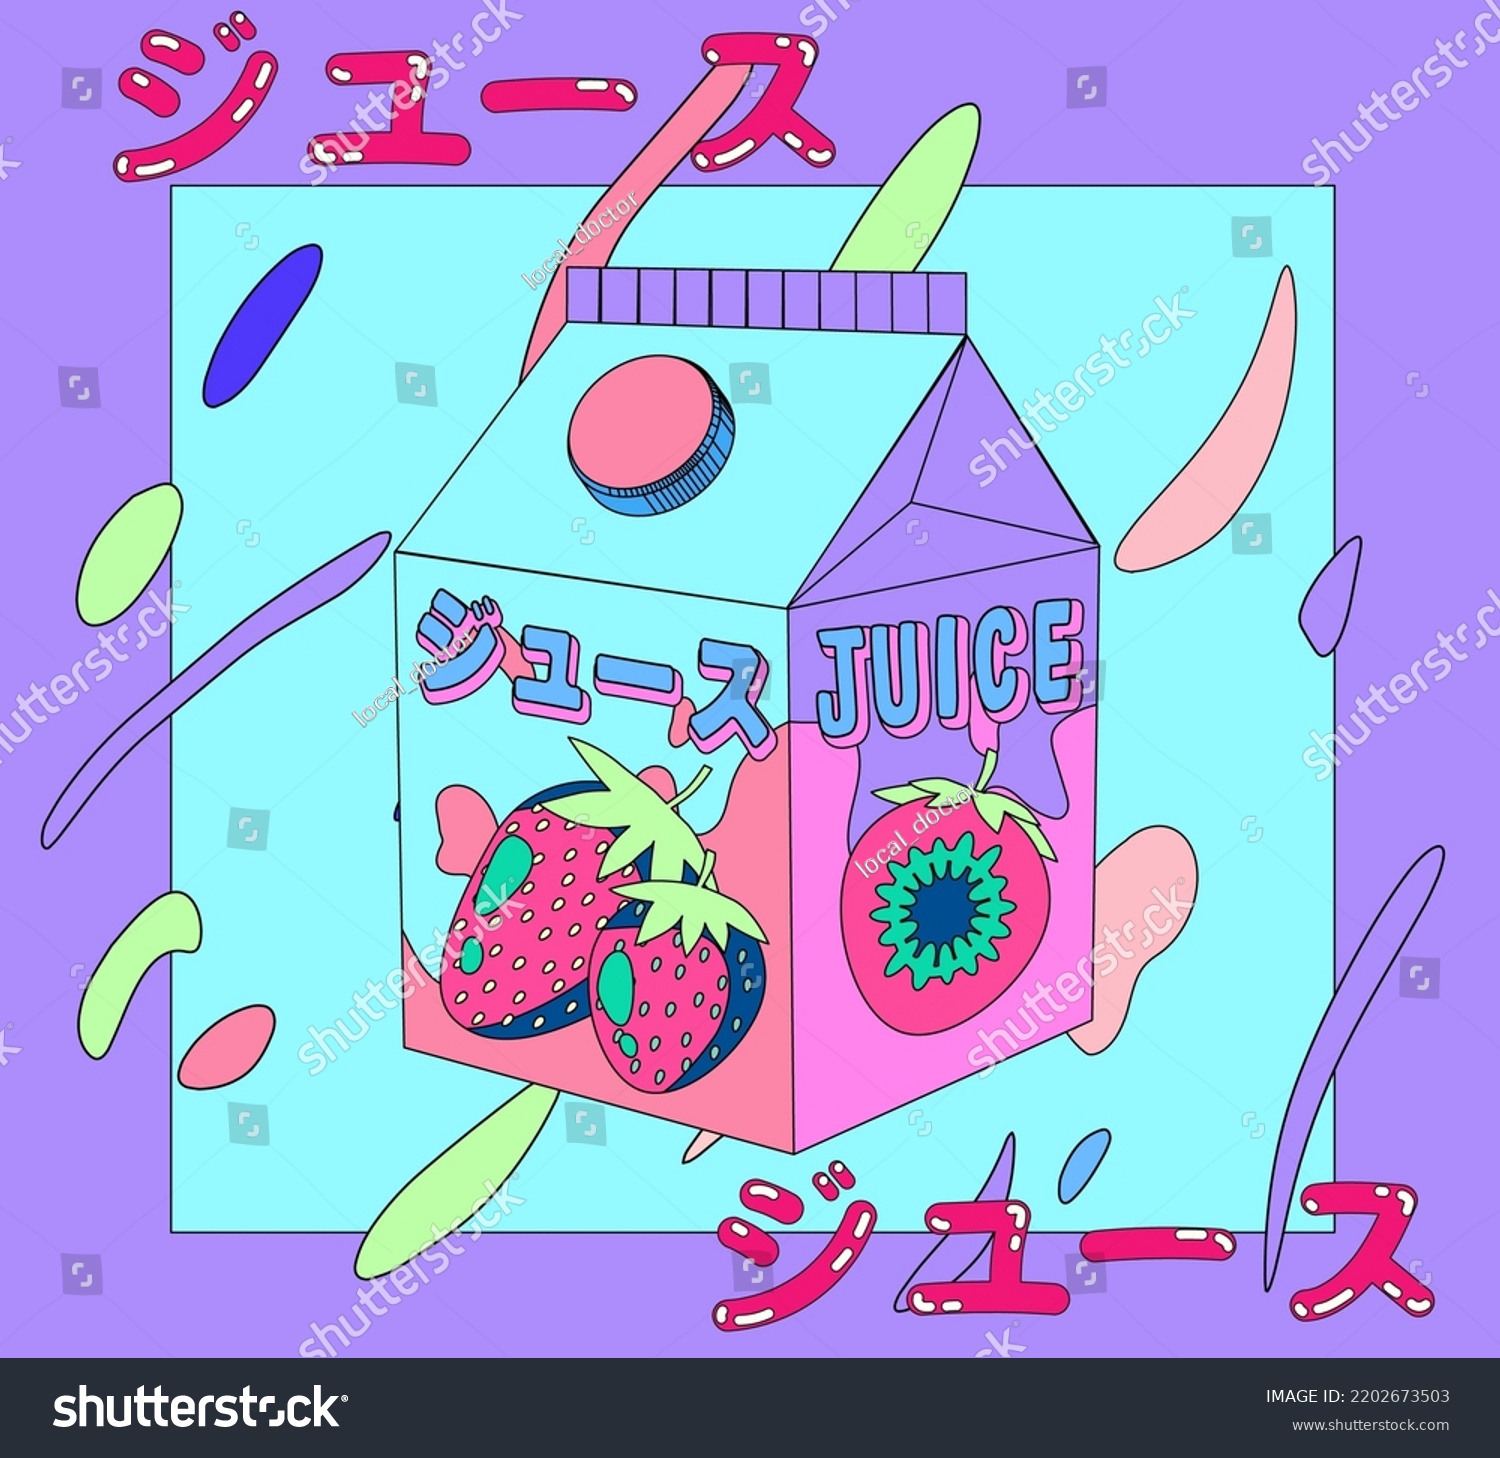 SVG of Retro anime style illustration of a strawberry juice pack. Vaporwave and city pop aesthetics. Japanese text means 